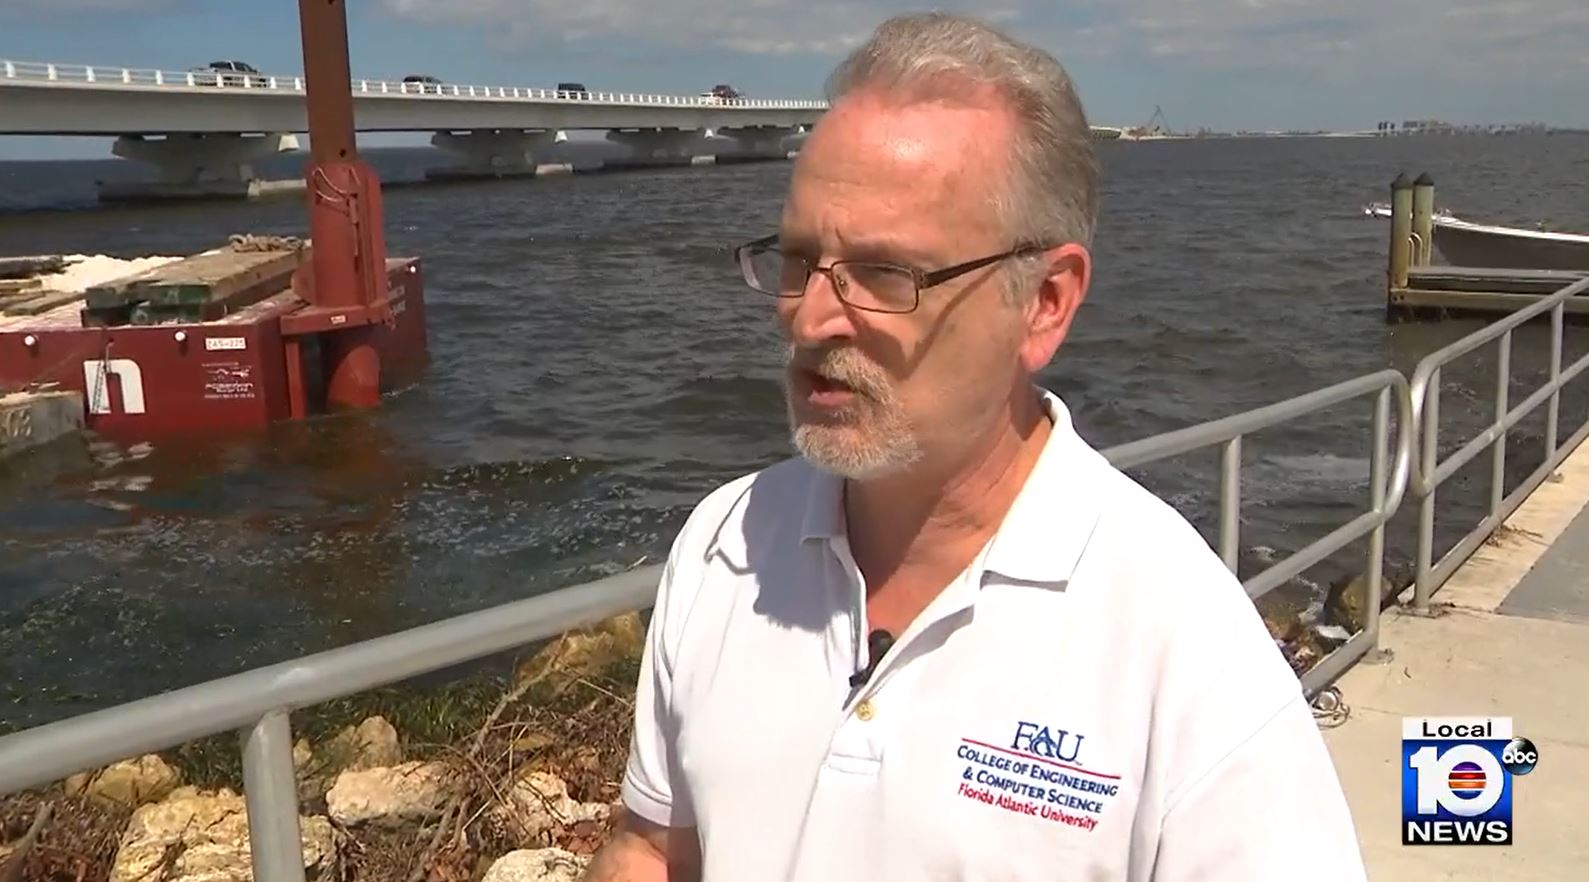 Dr. Bloetscher reviewing the response and recovery to Hurricane Ian with Local 10 News